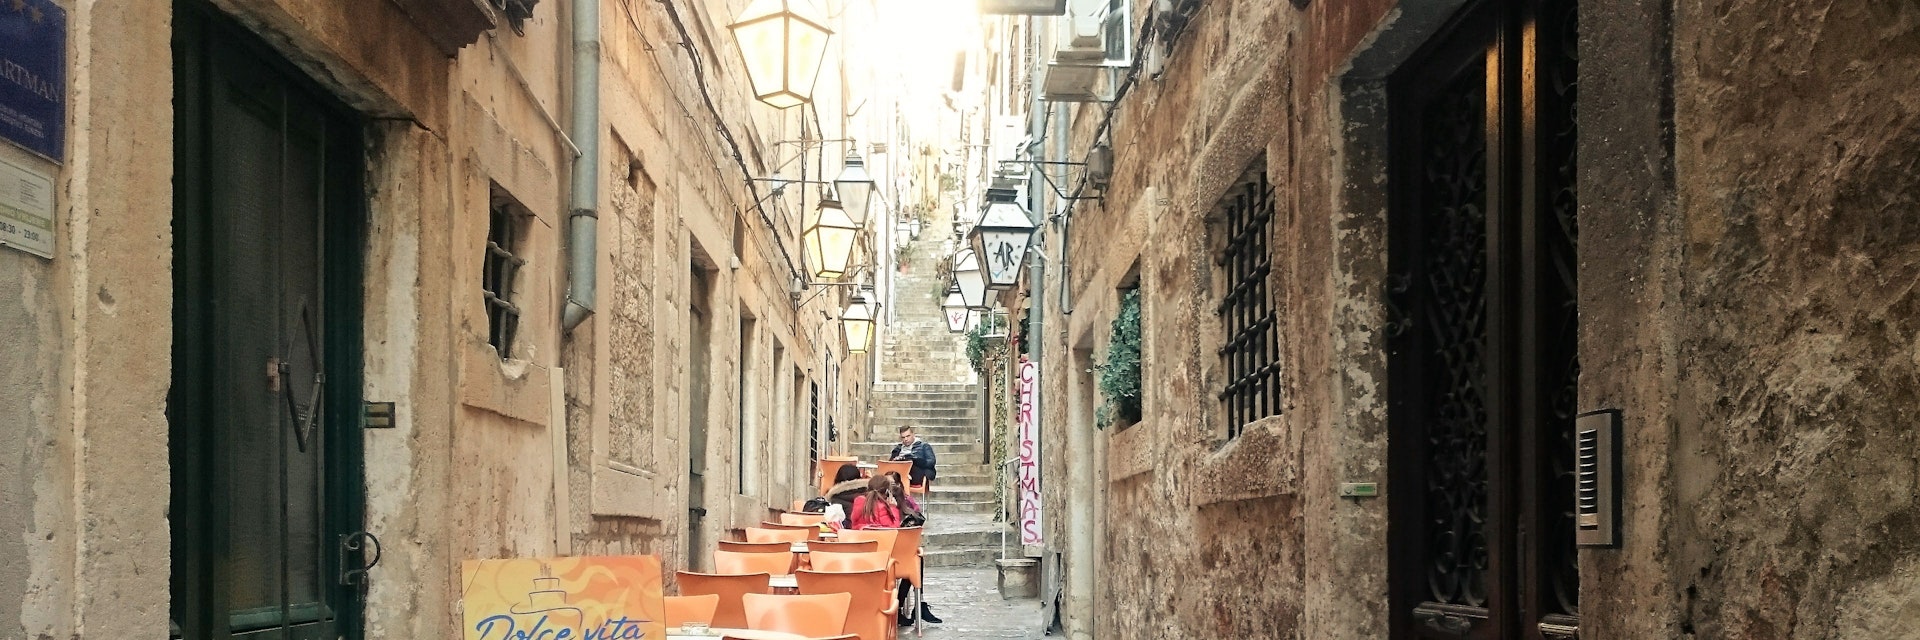 View of Dolce Vita outside seating from the beginning of the street